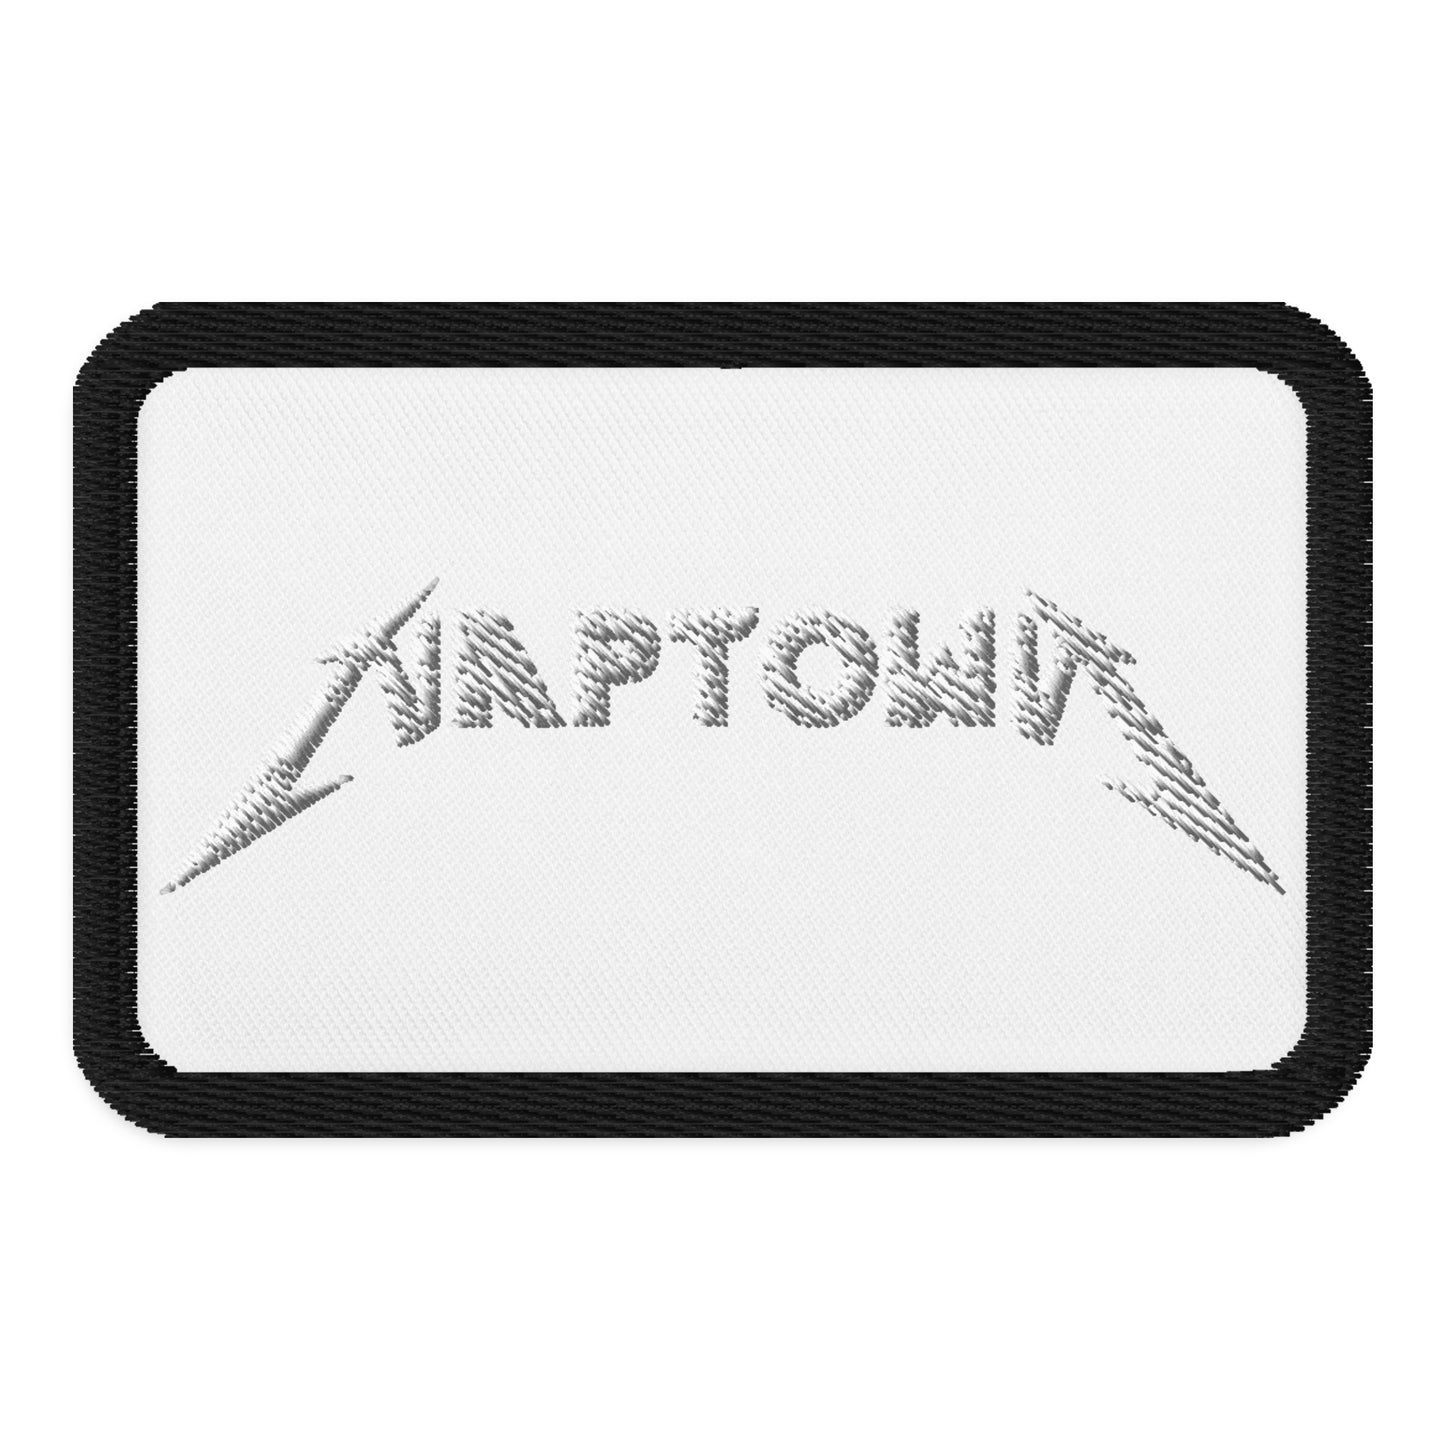 NAPTOWN Embroidered Patch 3.5"x2.25" - White Font